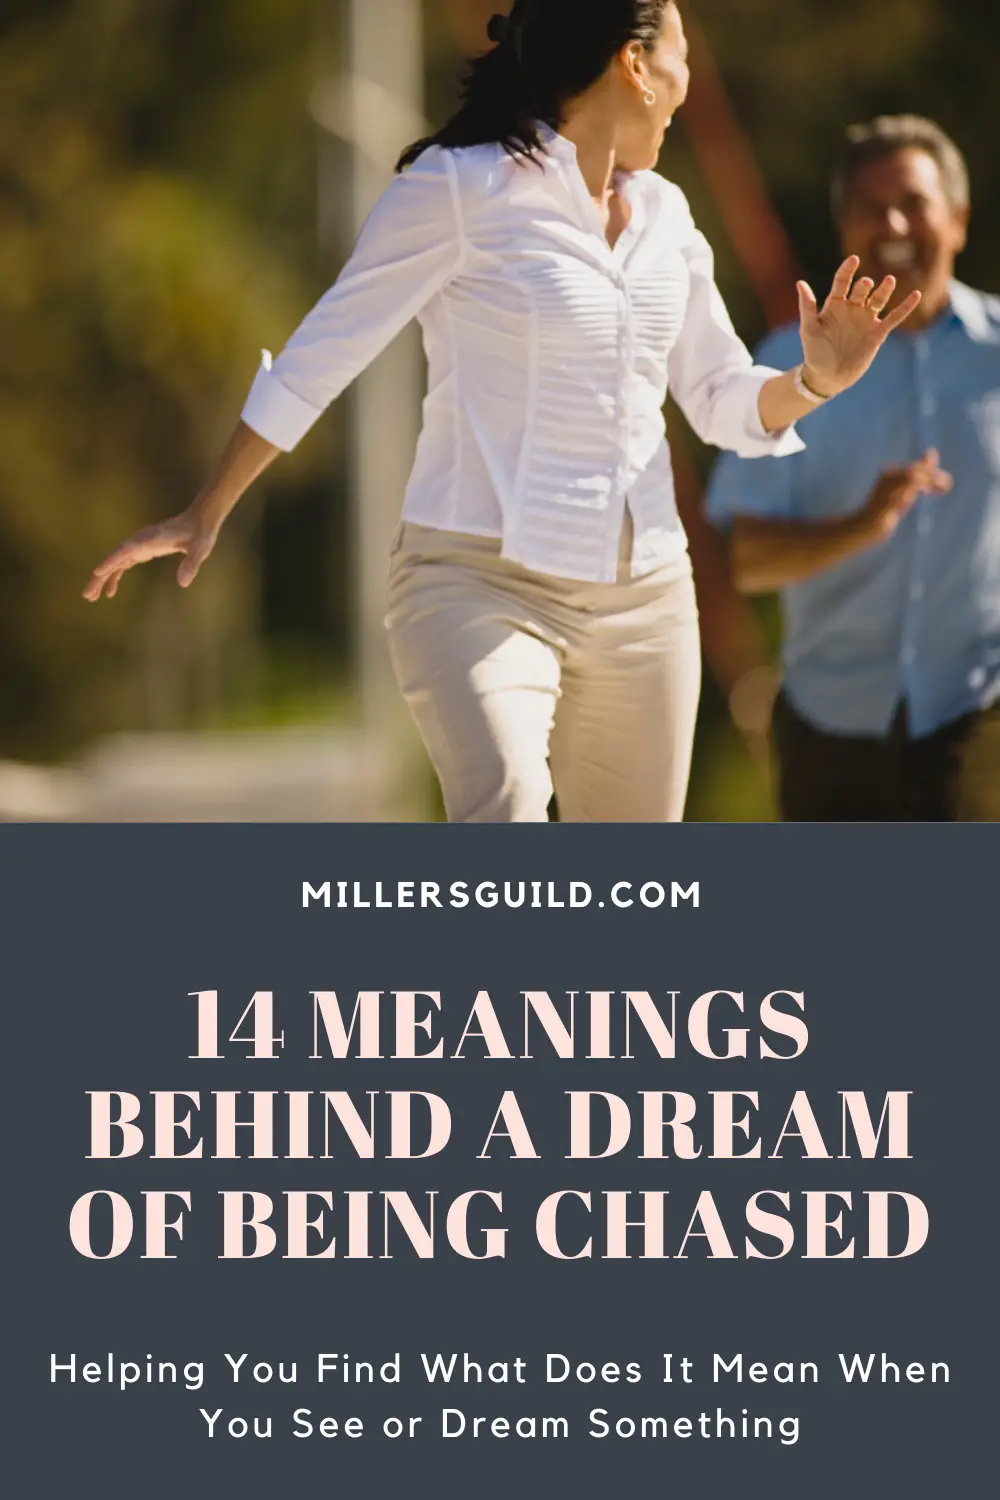 Common Dream Meanings Of Being Chased